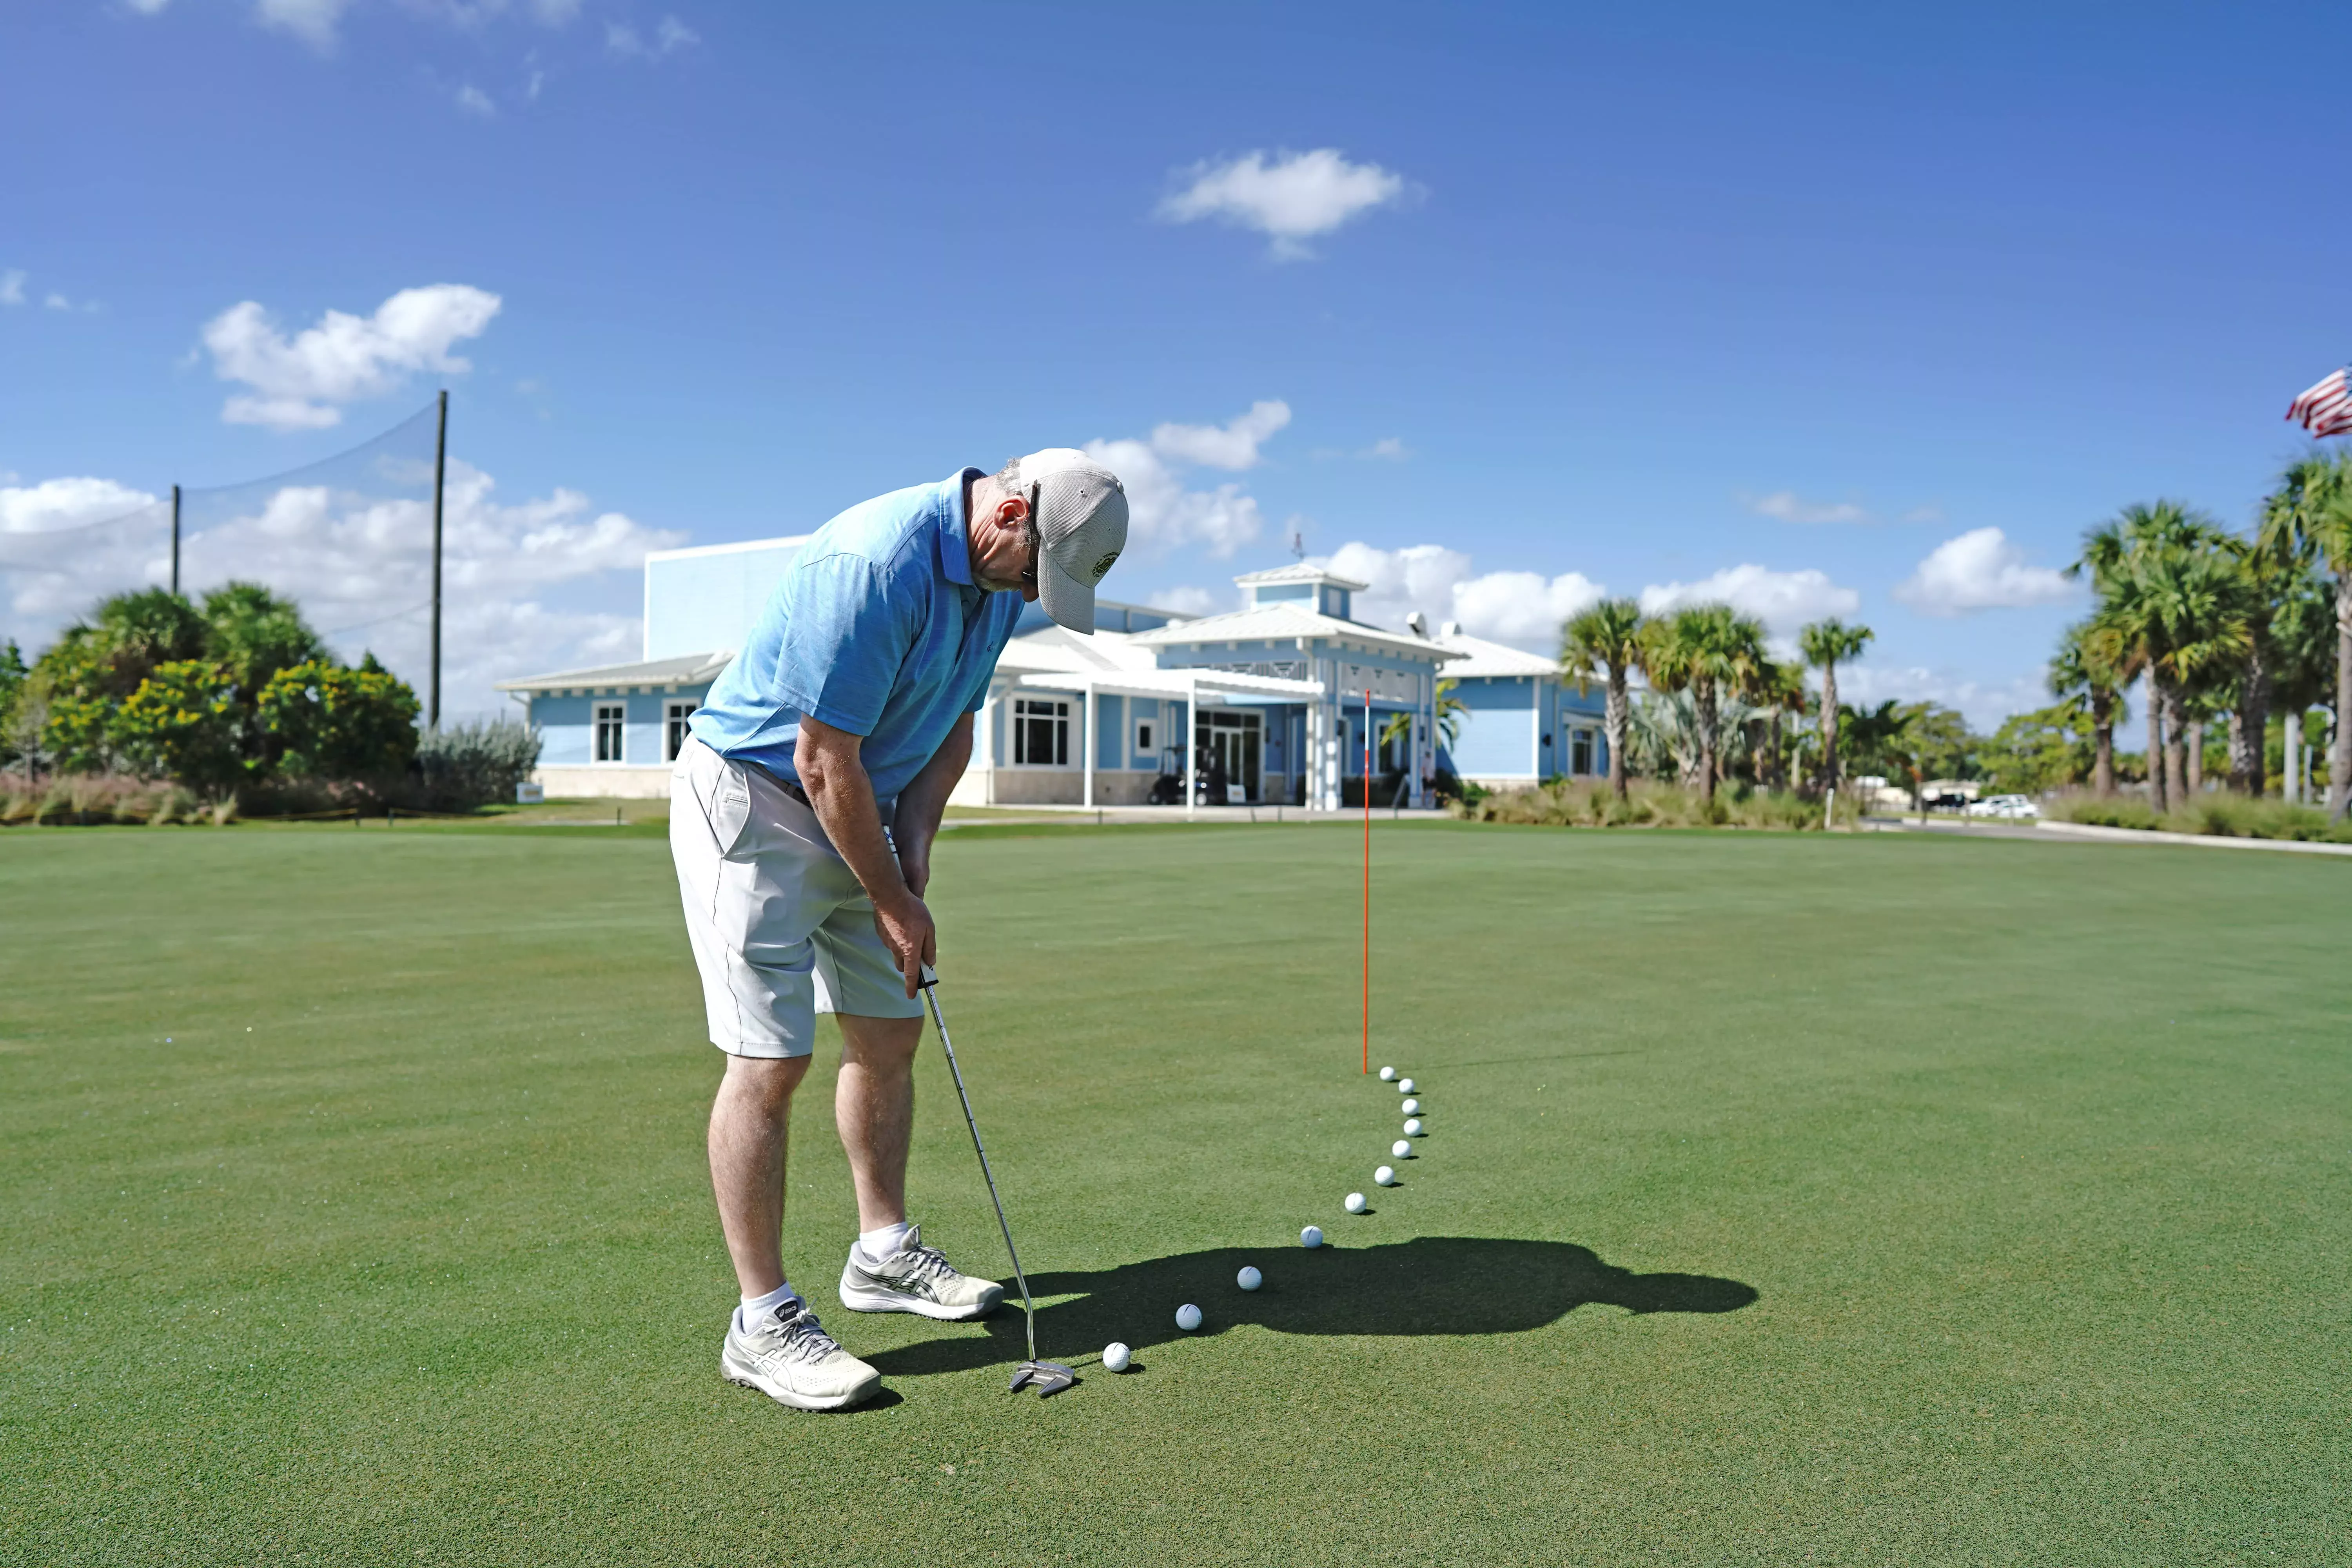 Image of a golfer on a putting green at Sailfish Sands Golf Course